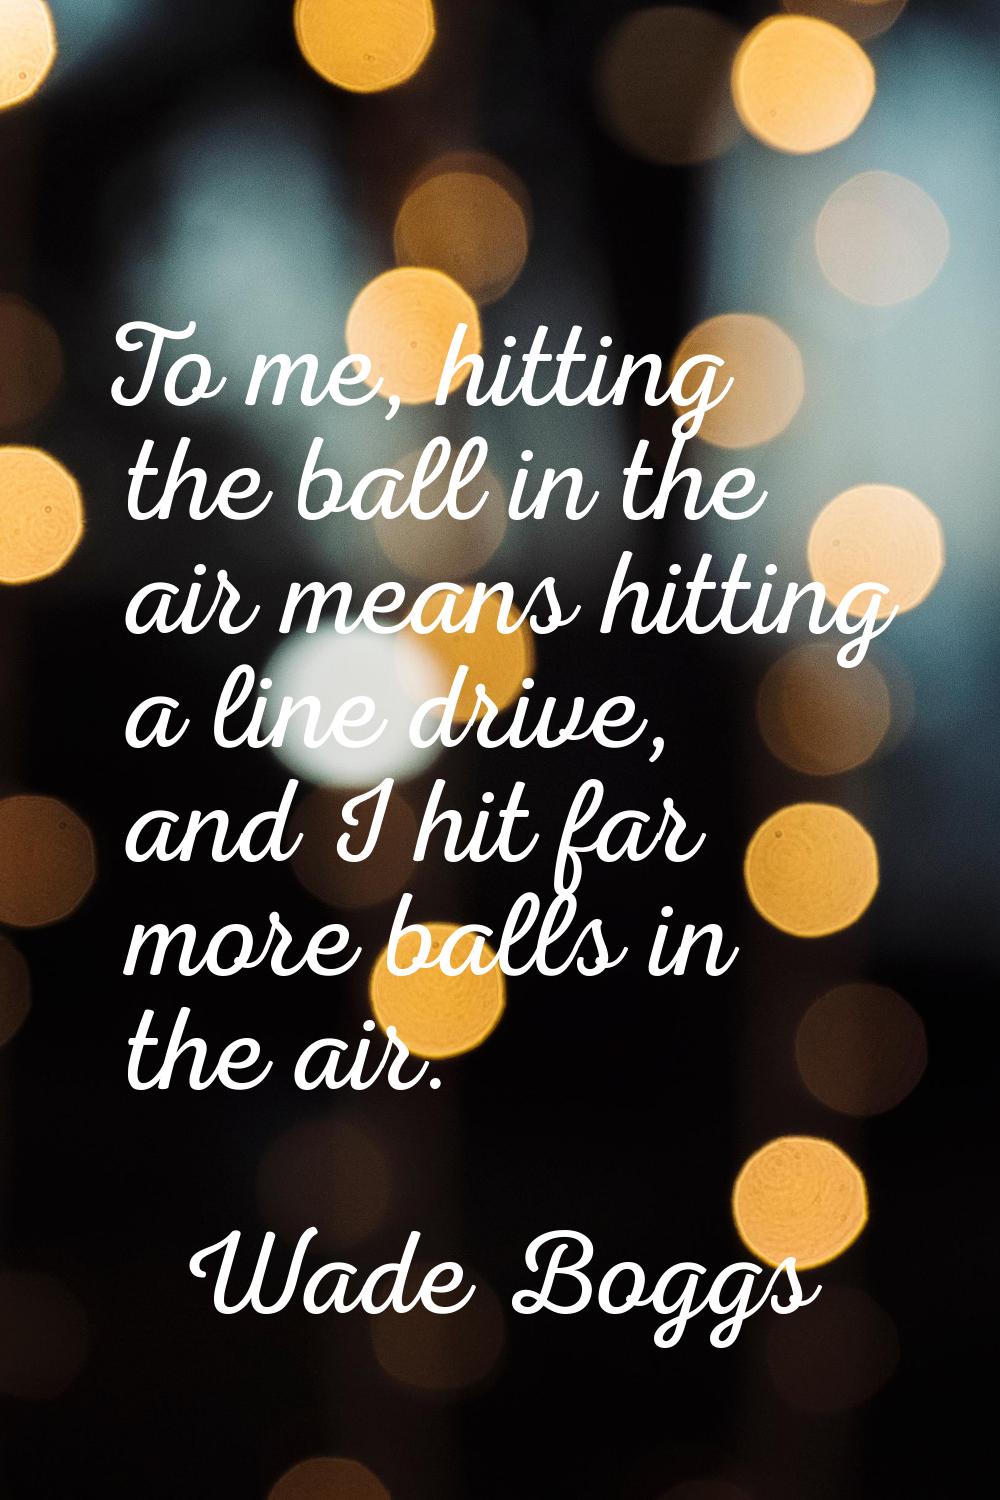 To me, hitting the ball in the air means hitting a line drive, and I hit far more balls in the air.